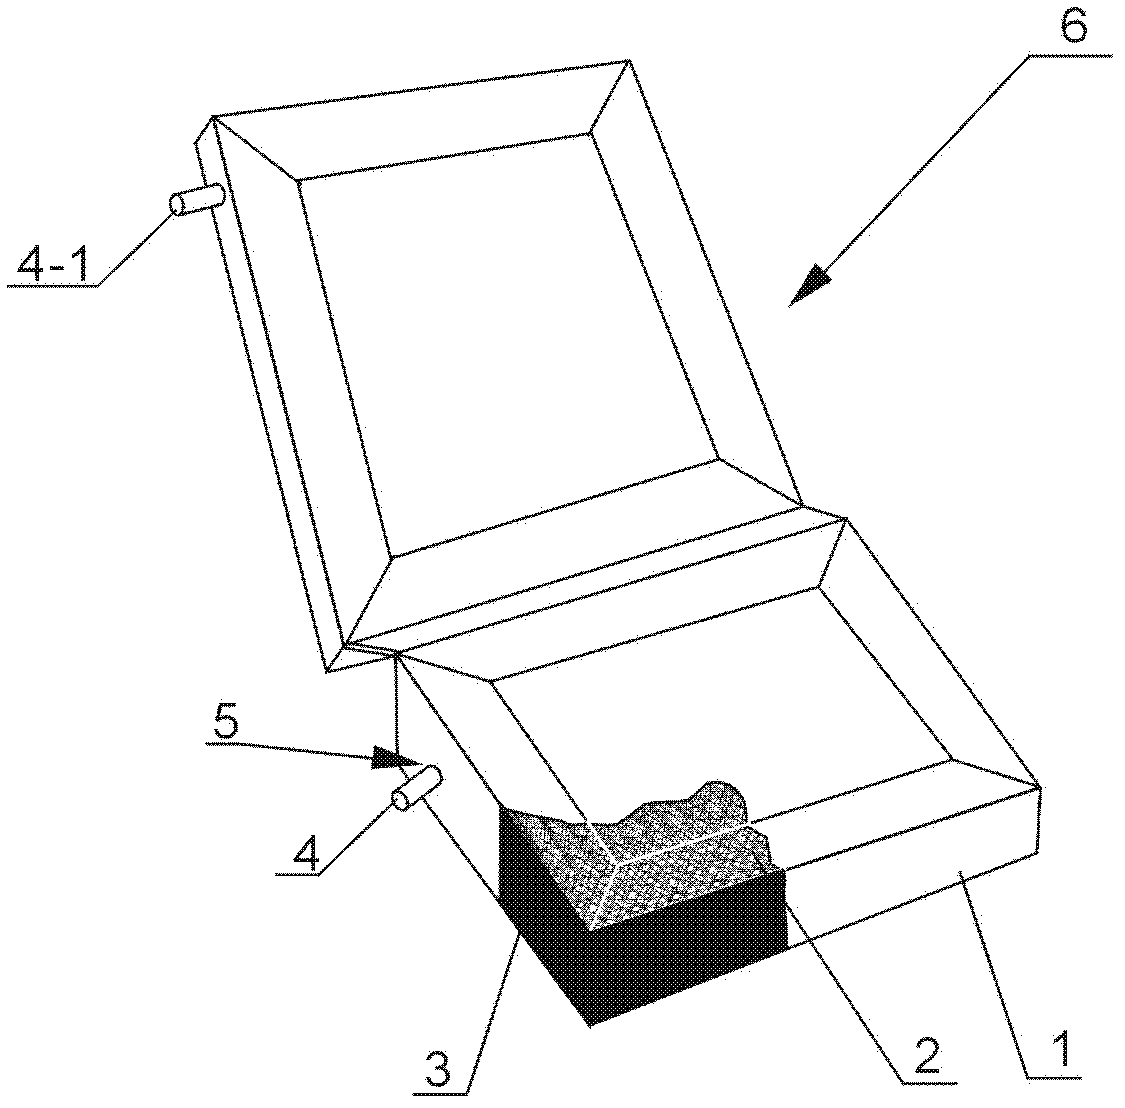 Manufacturing method and structure of metal wire ball seat cushion